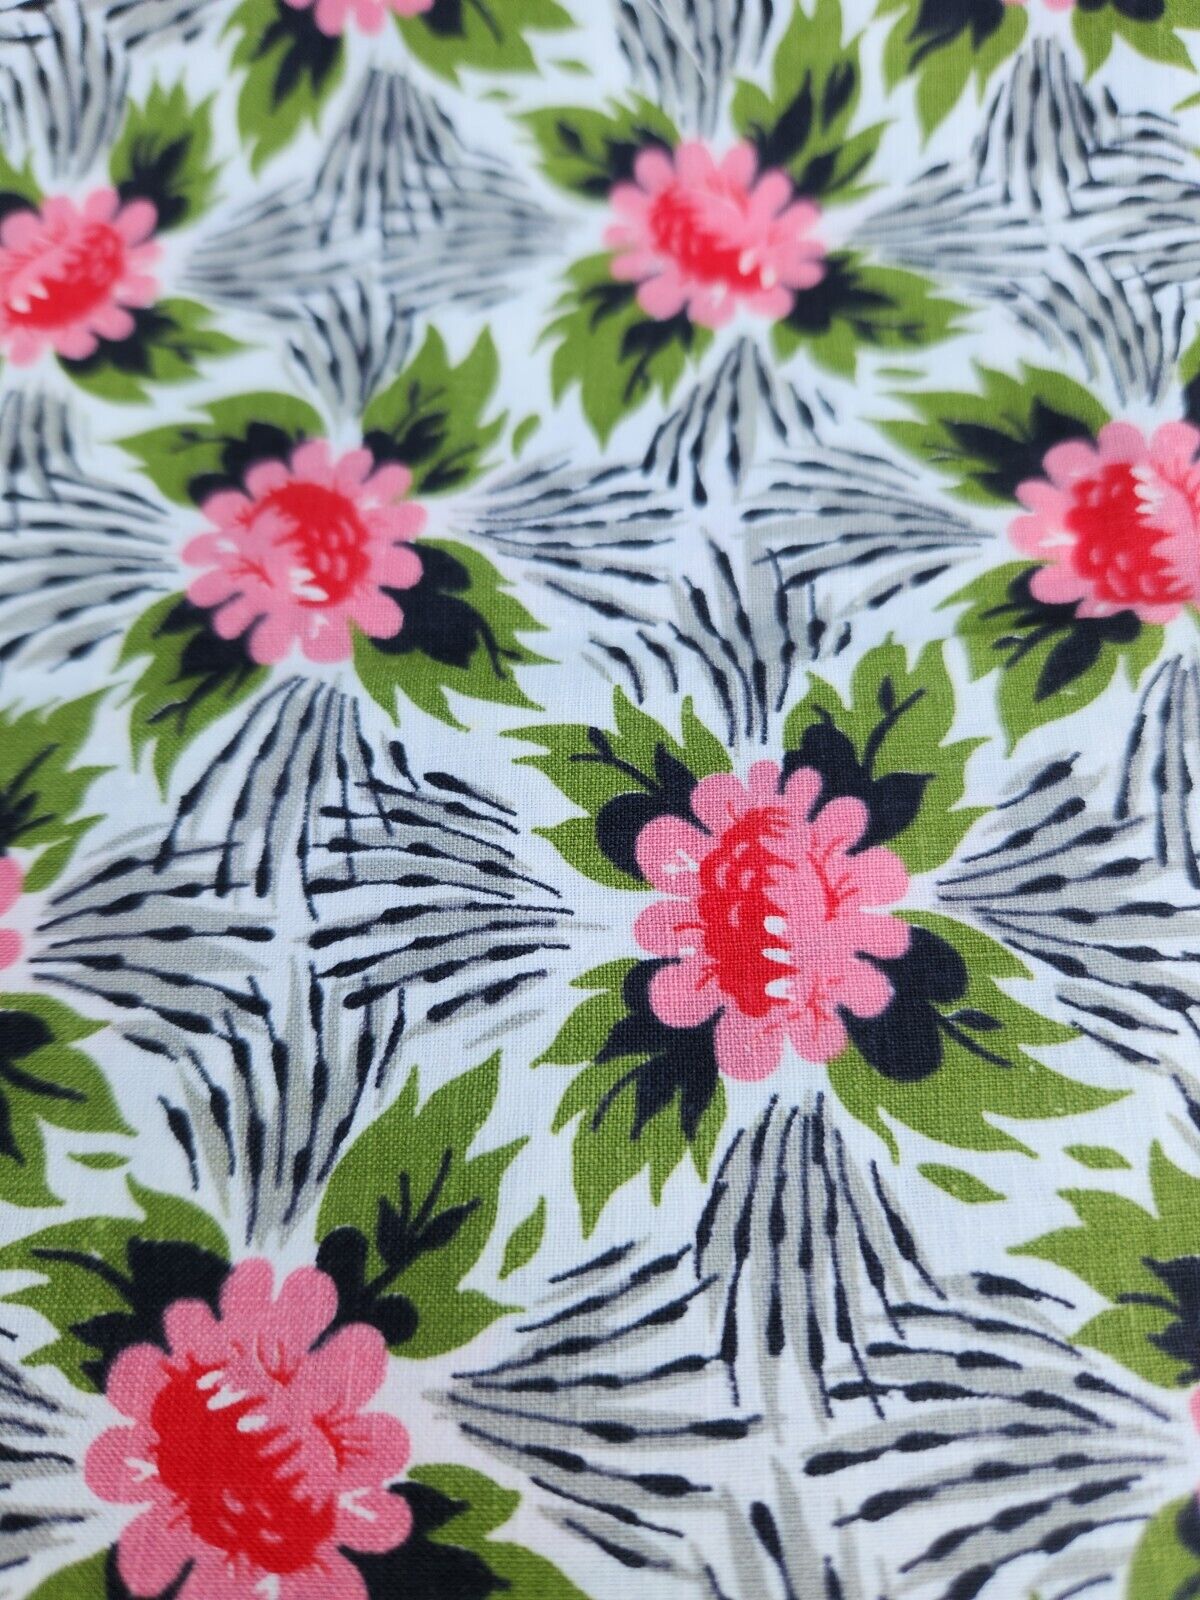 Vintage 1960s  Hawaiian Print Floral Cotton Fabric Almost 3 yards  MCM